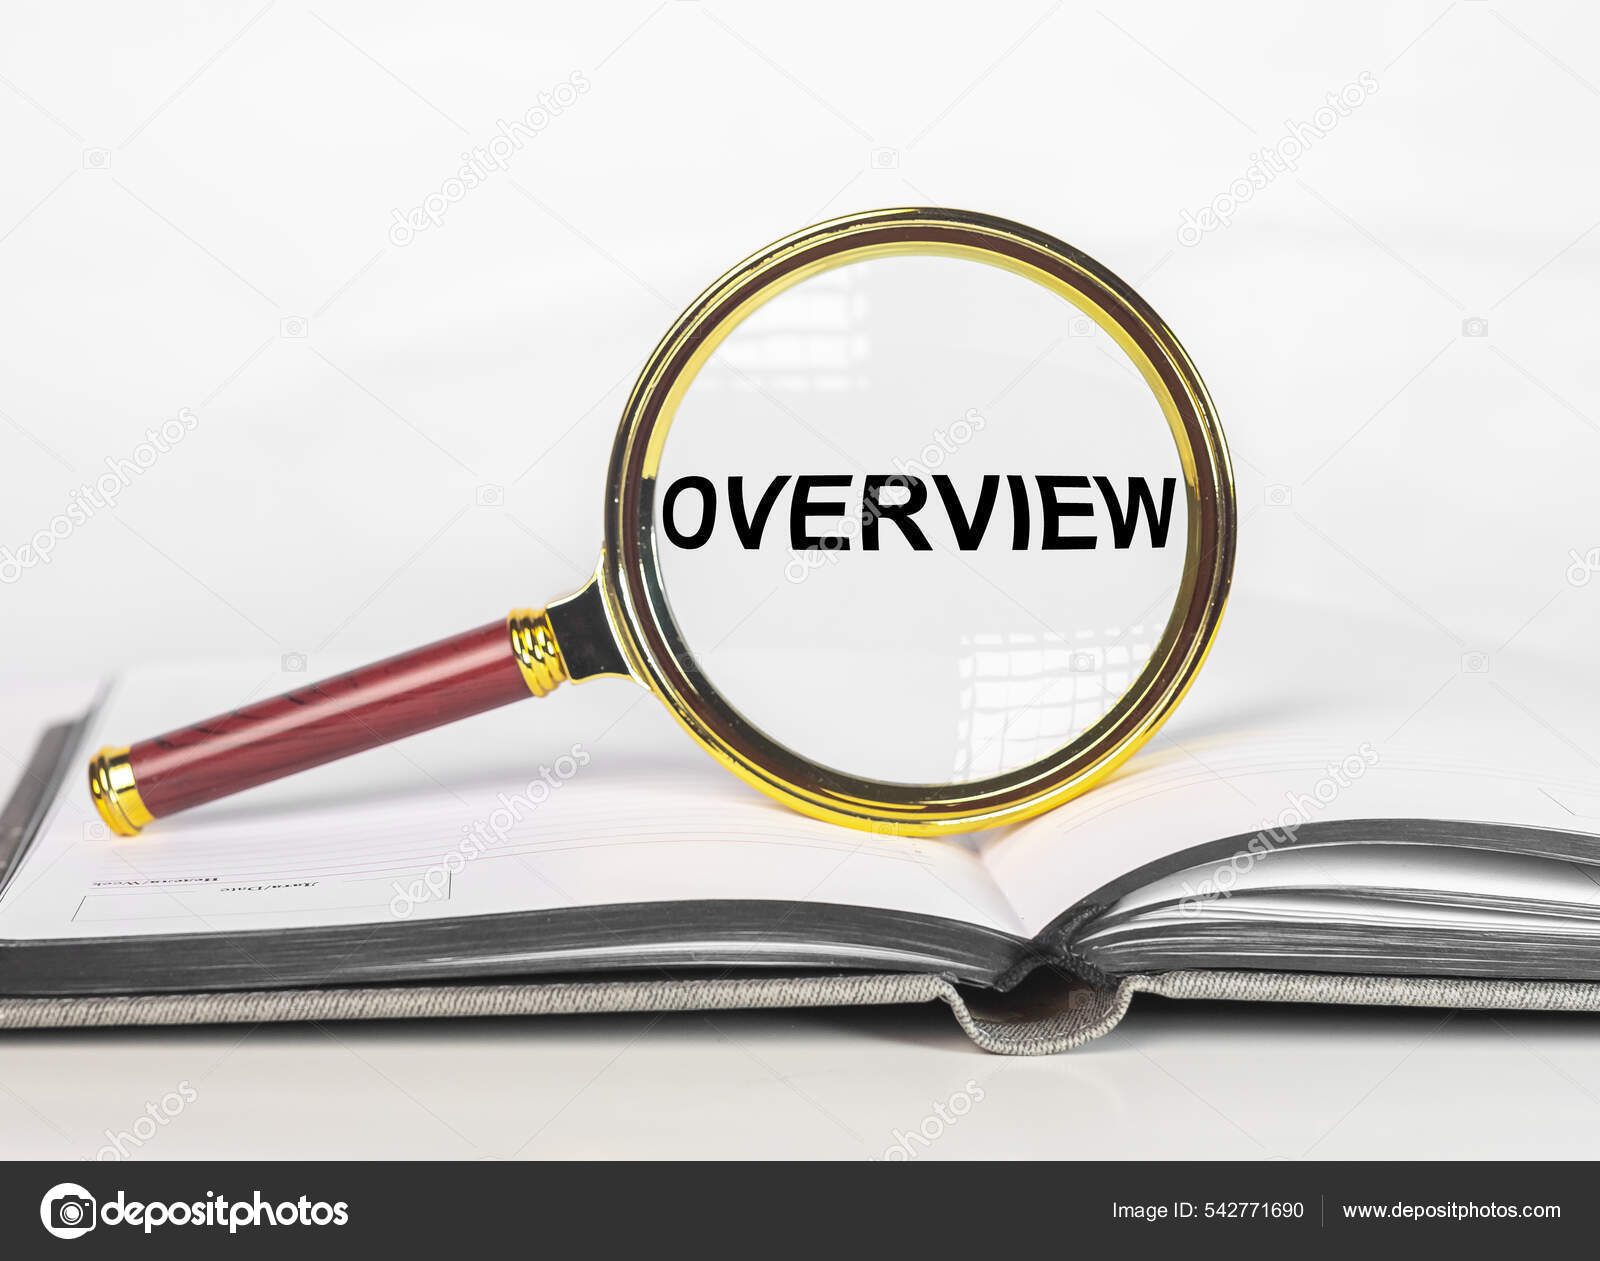 Overview word through magnifying lens. Recap and summary concept